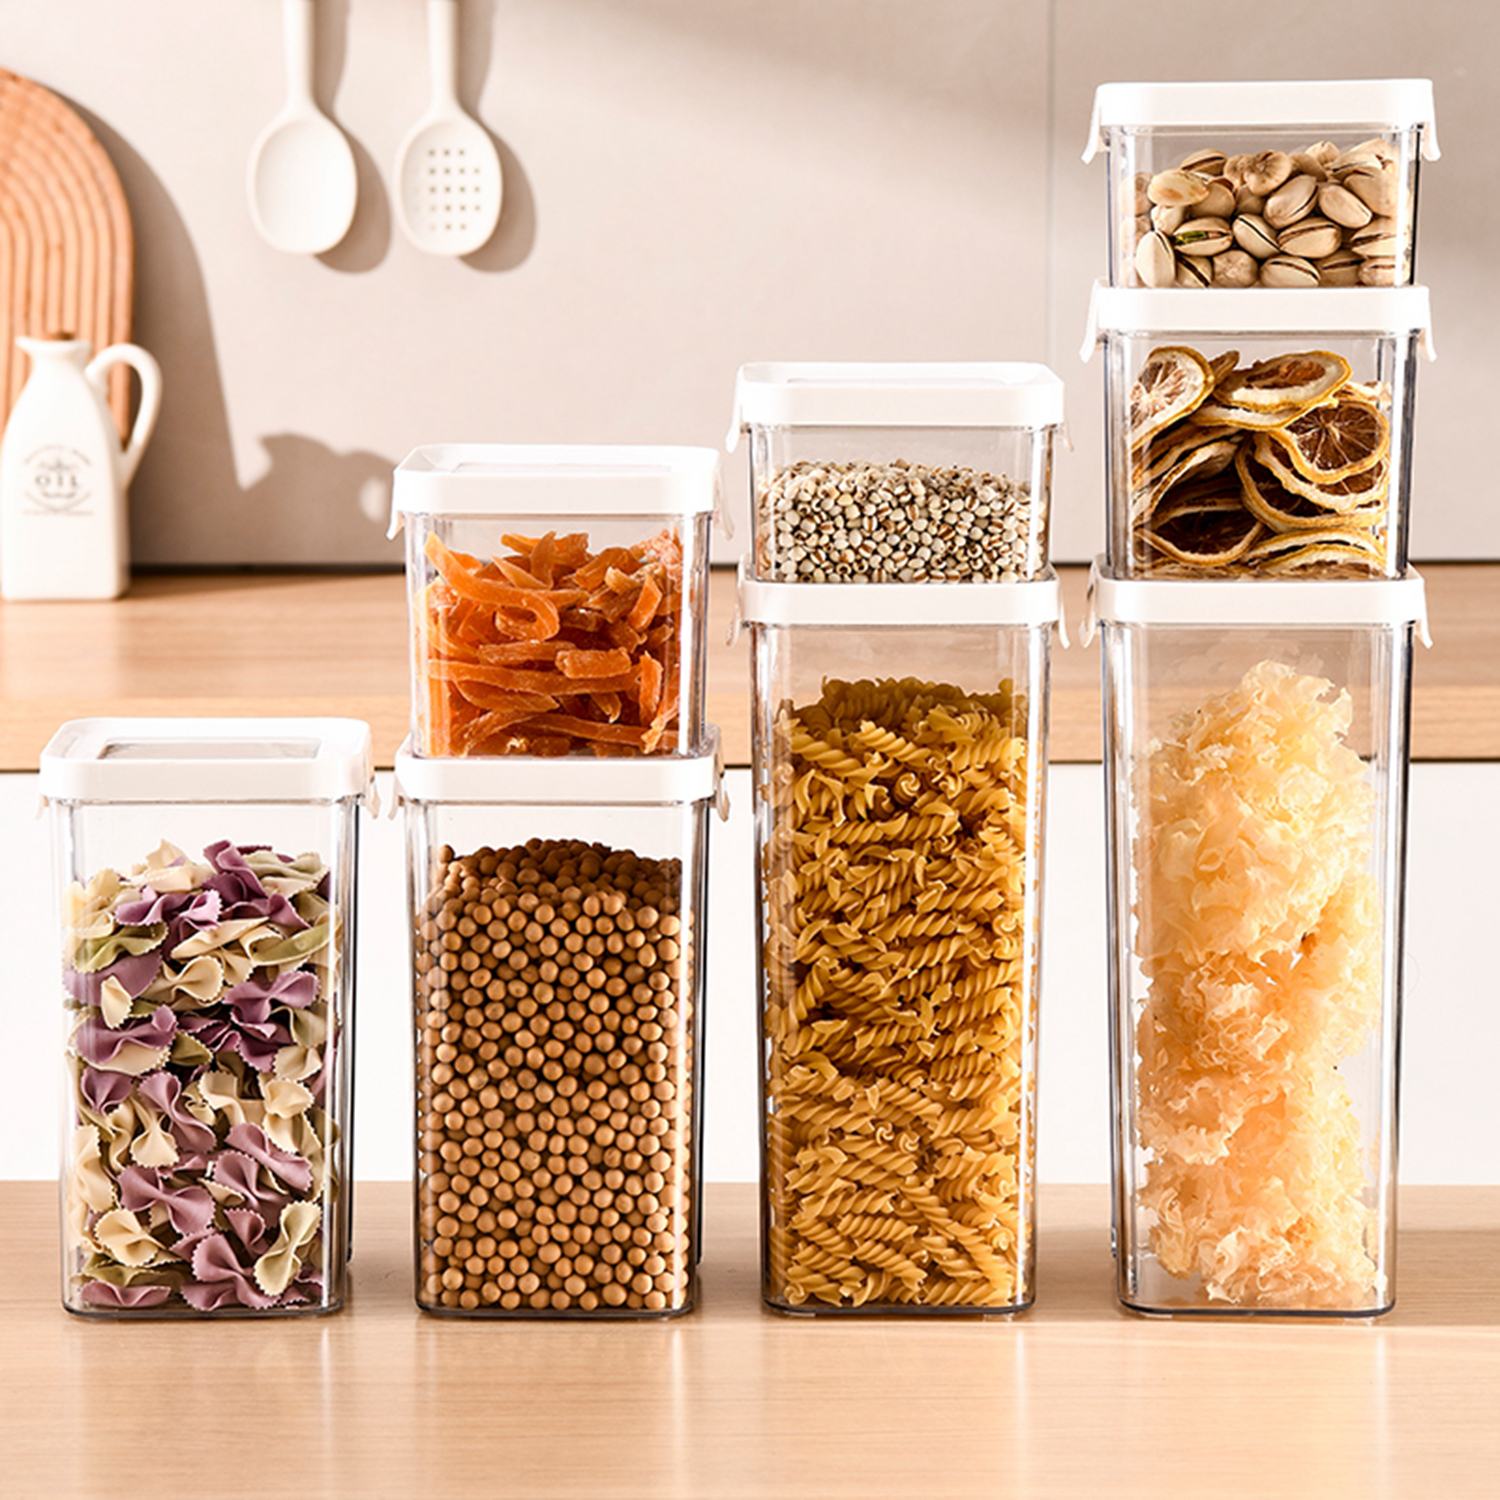 Airtight Food Containers With Easy Lock Lids, Bpa Free Plastic Containers  For Pantry Organization And Storage, Ideal For Cereal, Sugar, Dry Food,  Salt, Spices, Multipurpose Storage Container, Kitchen Accessories - Temu